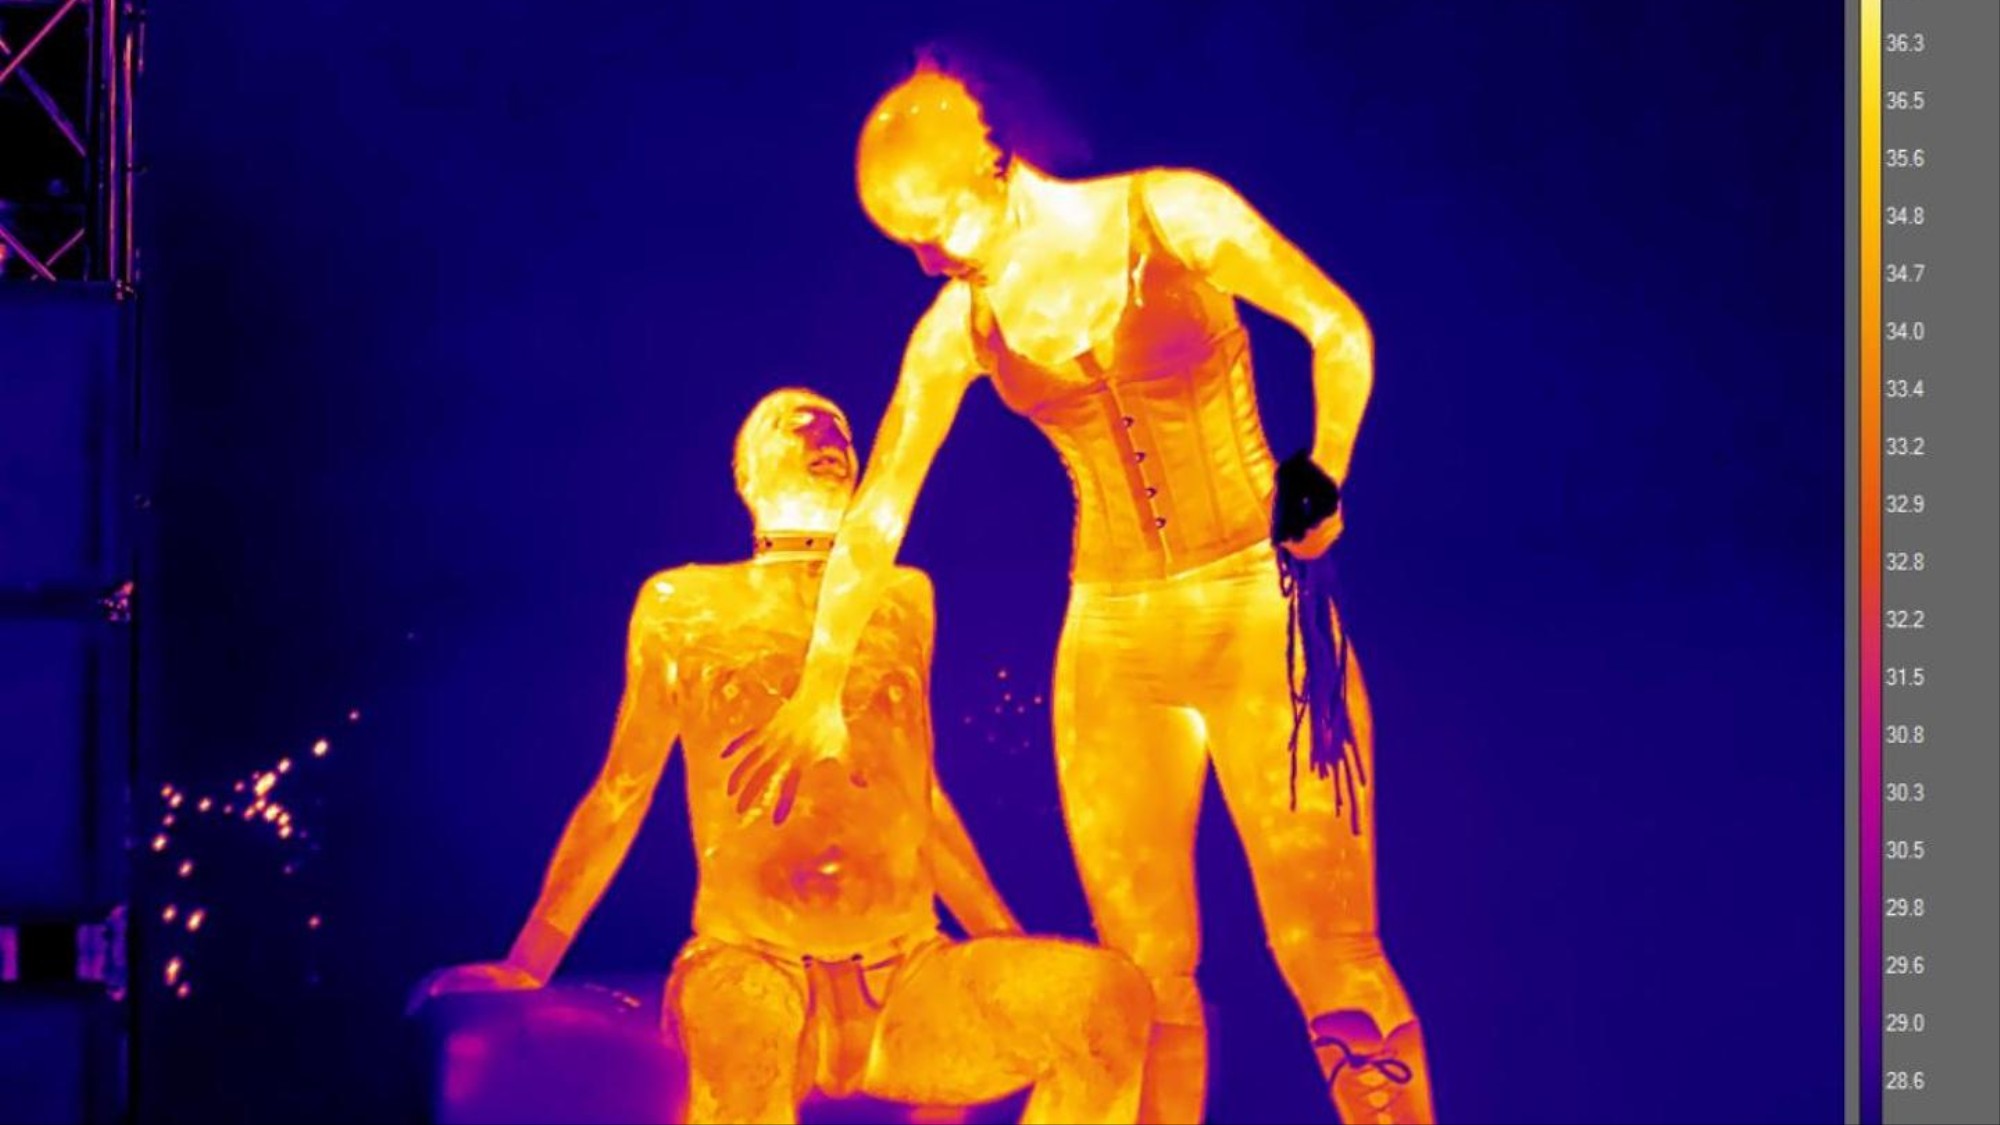 German Live Sex Stage Shows - We Photographed a Porn Convention with a Thermal Camera - VICE